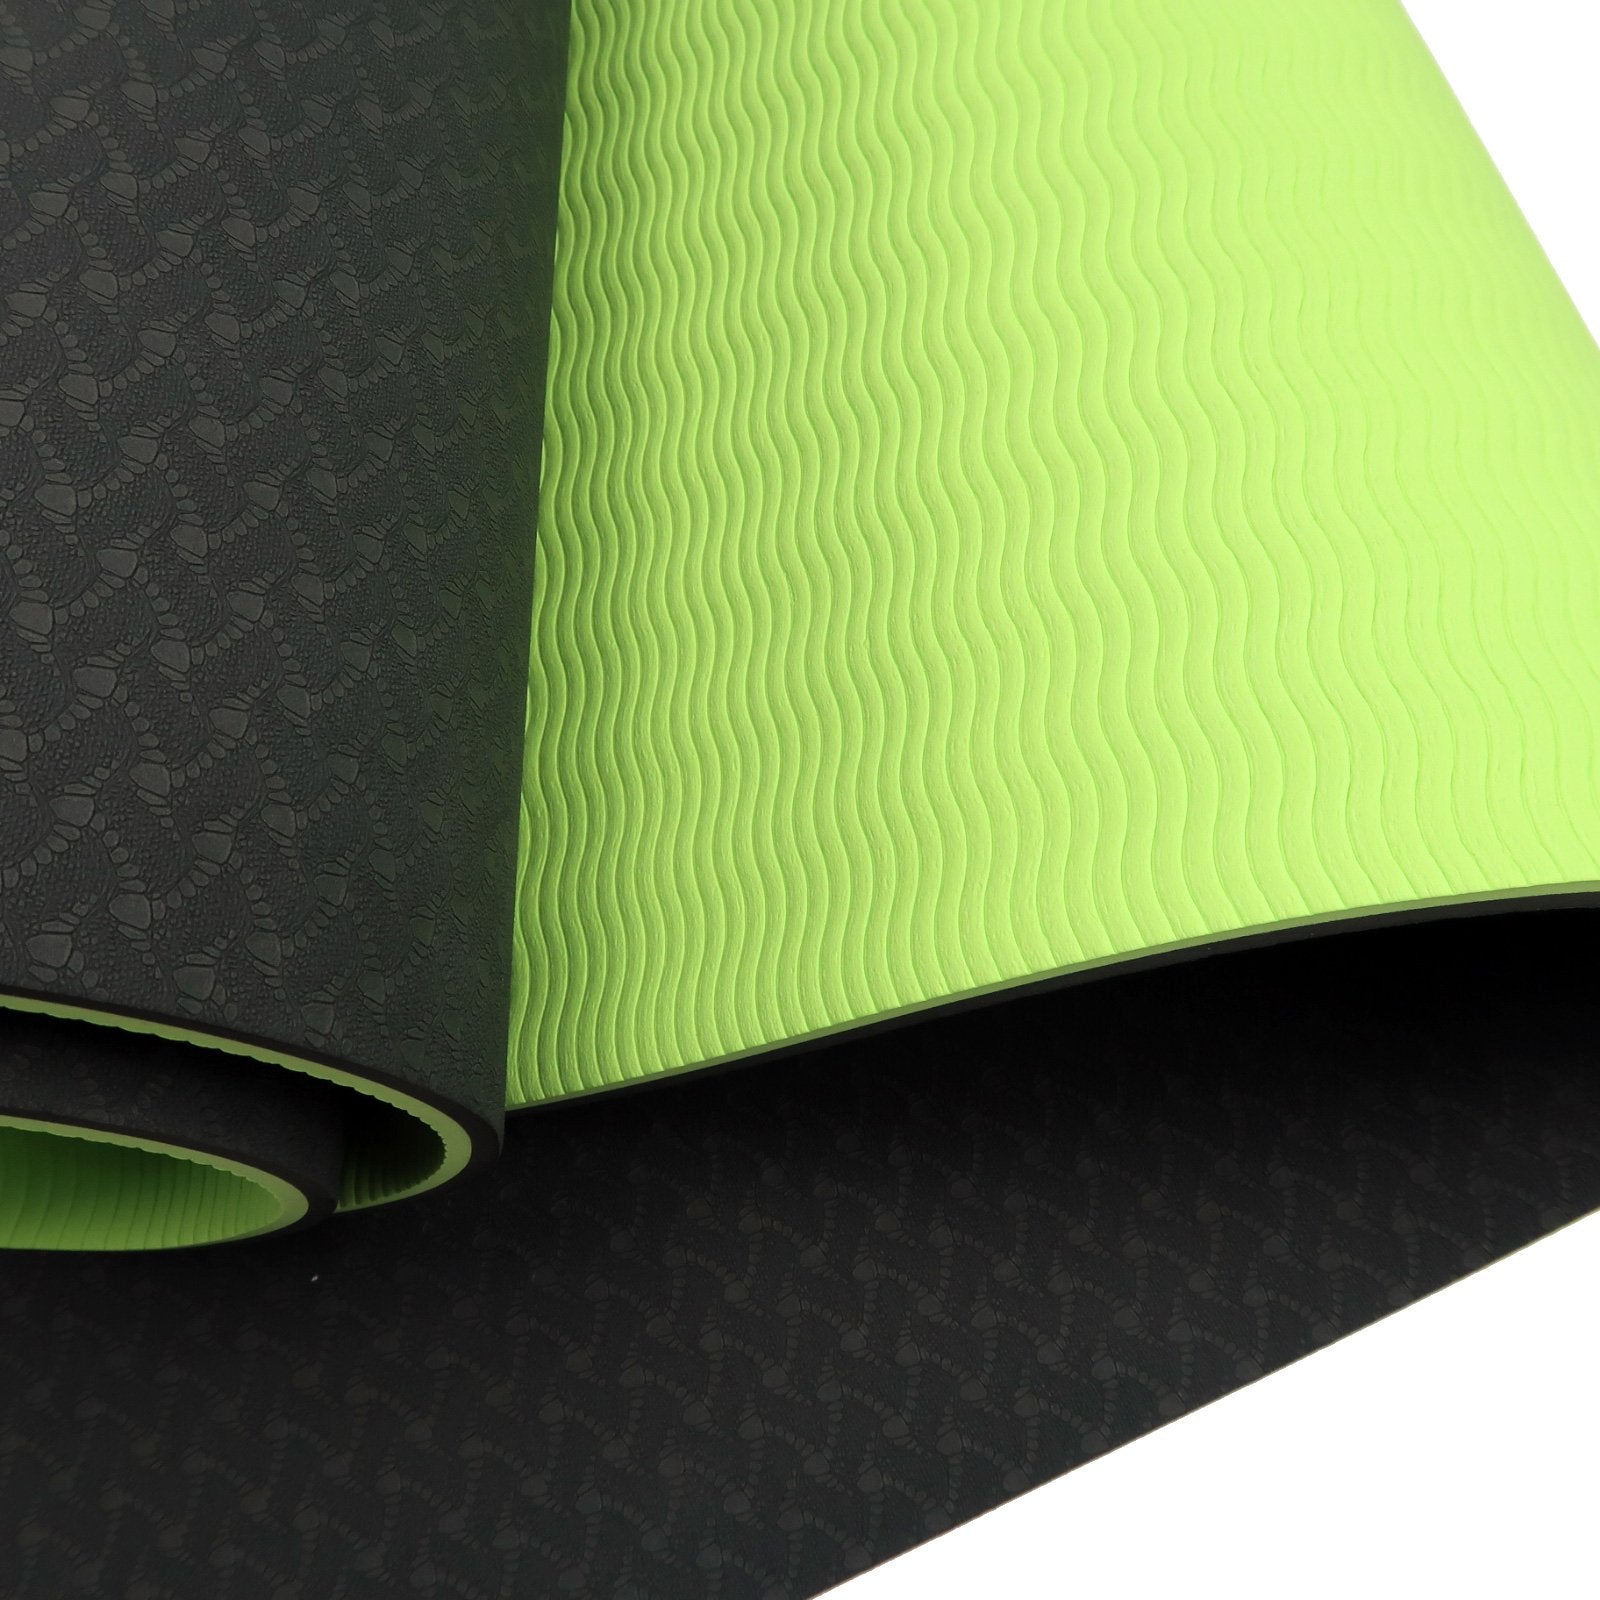 Eco-Friendly Dual Layer 8mm Yoga Mat | Black Green | Non-Slip Surface and Carry Strap for Ultimate Comfort and Portability